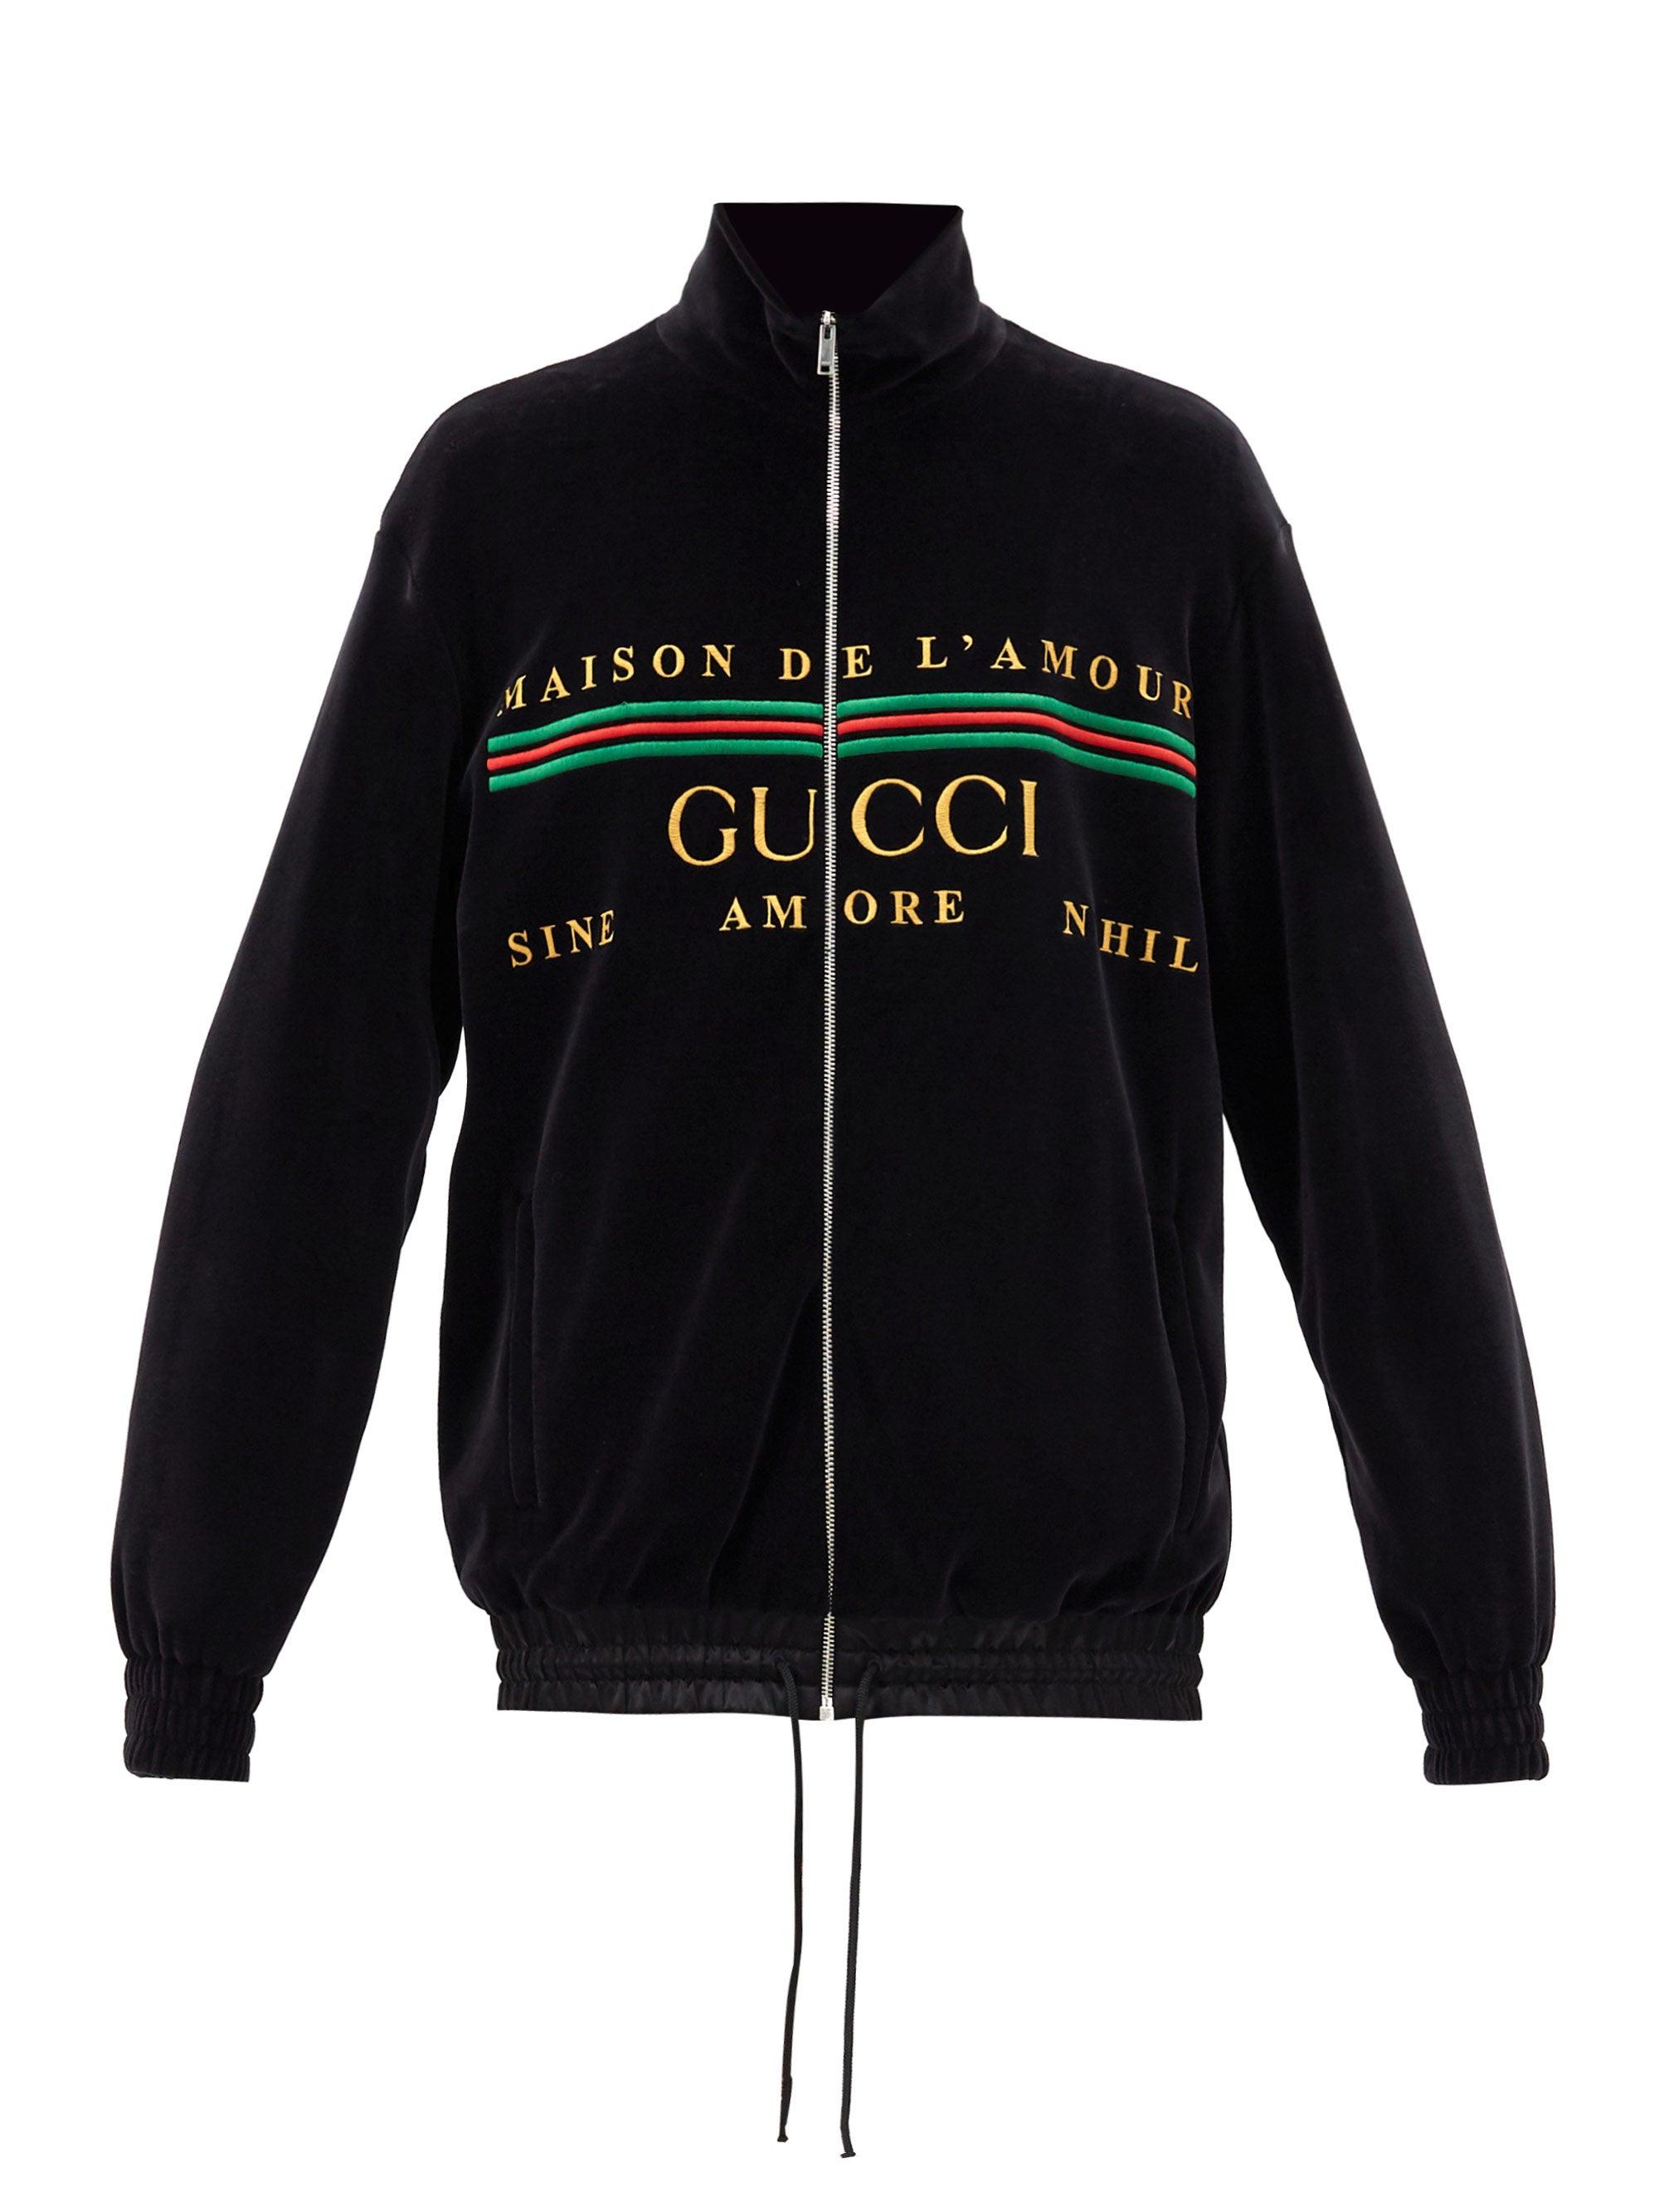 Gucci Cotton Logo Embroidered Jacket in Black for Men - Save 52% - Lyst